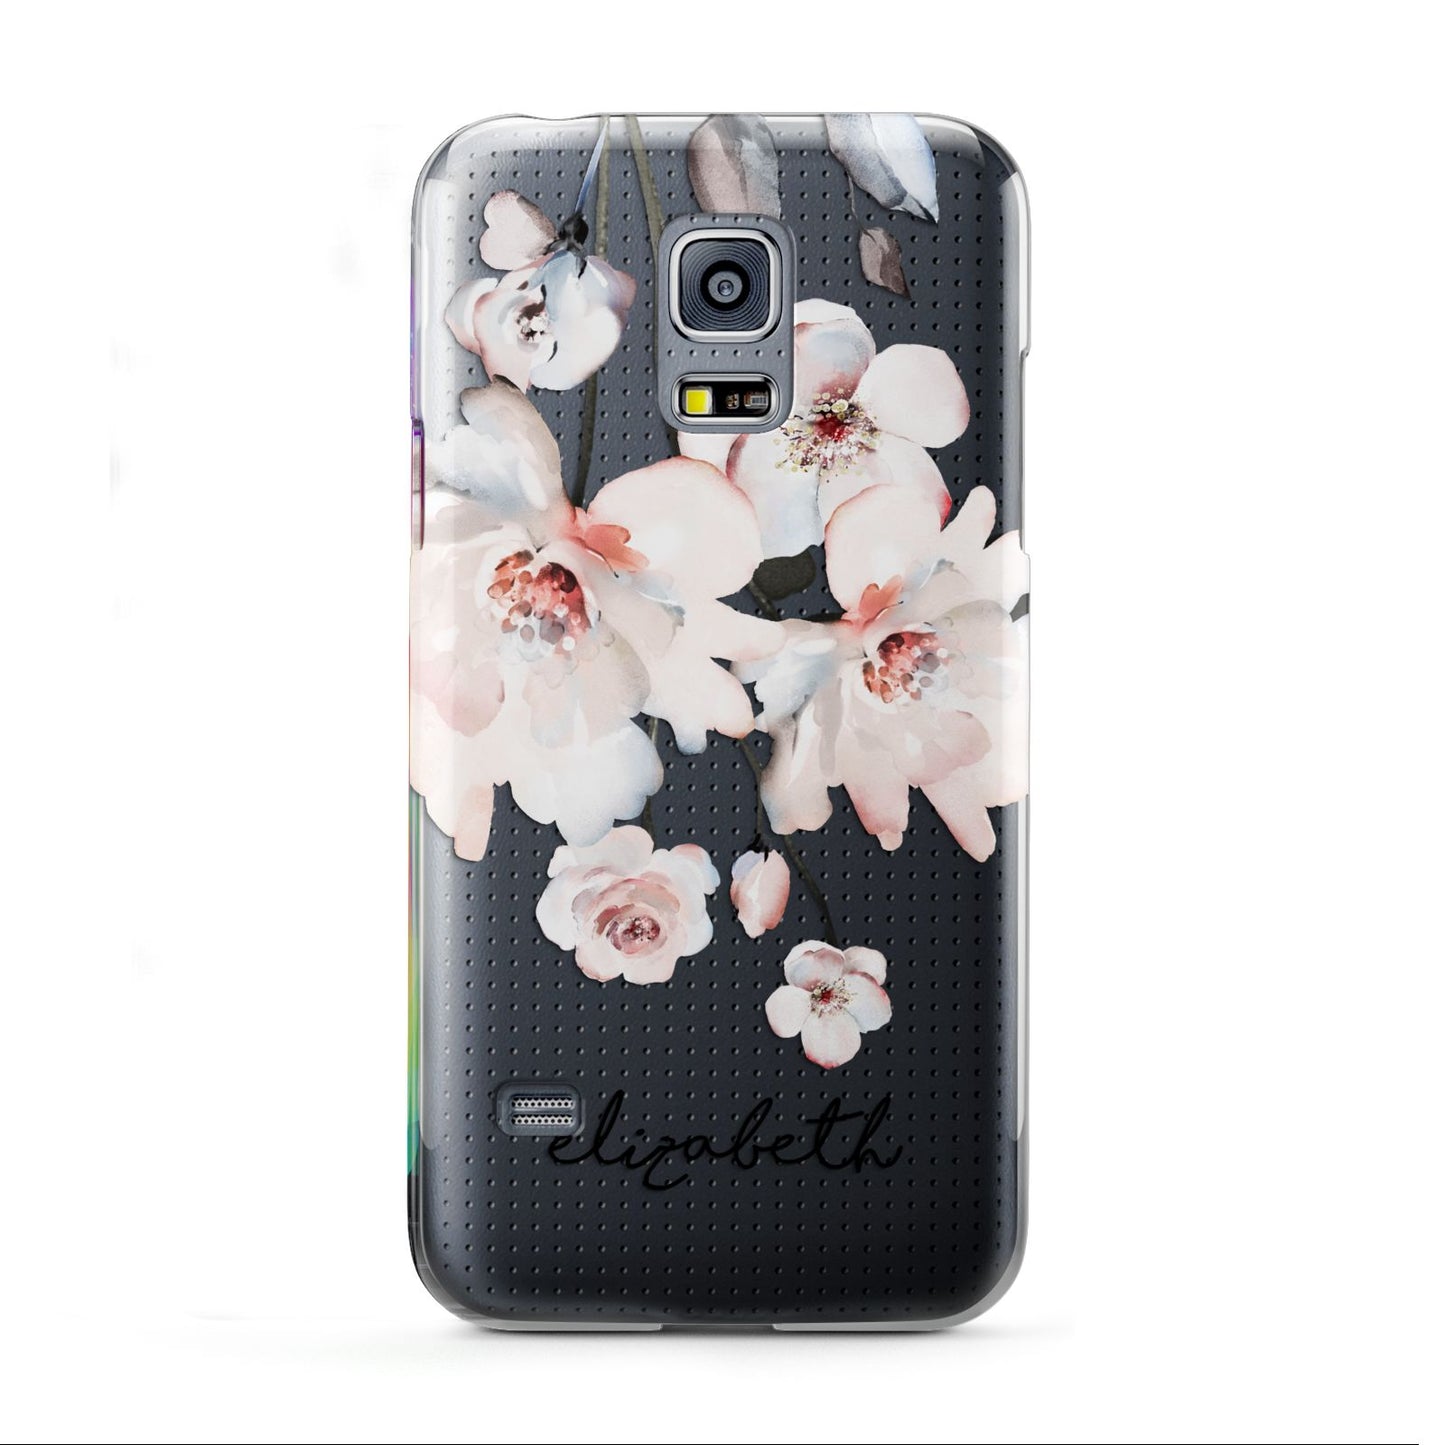 Personalised Name Roses Watercolour Samsung Galaxy S5 Mini Case